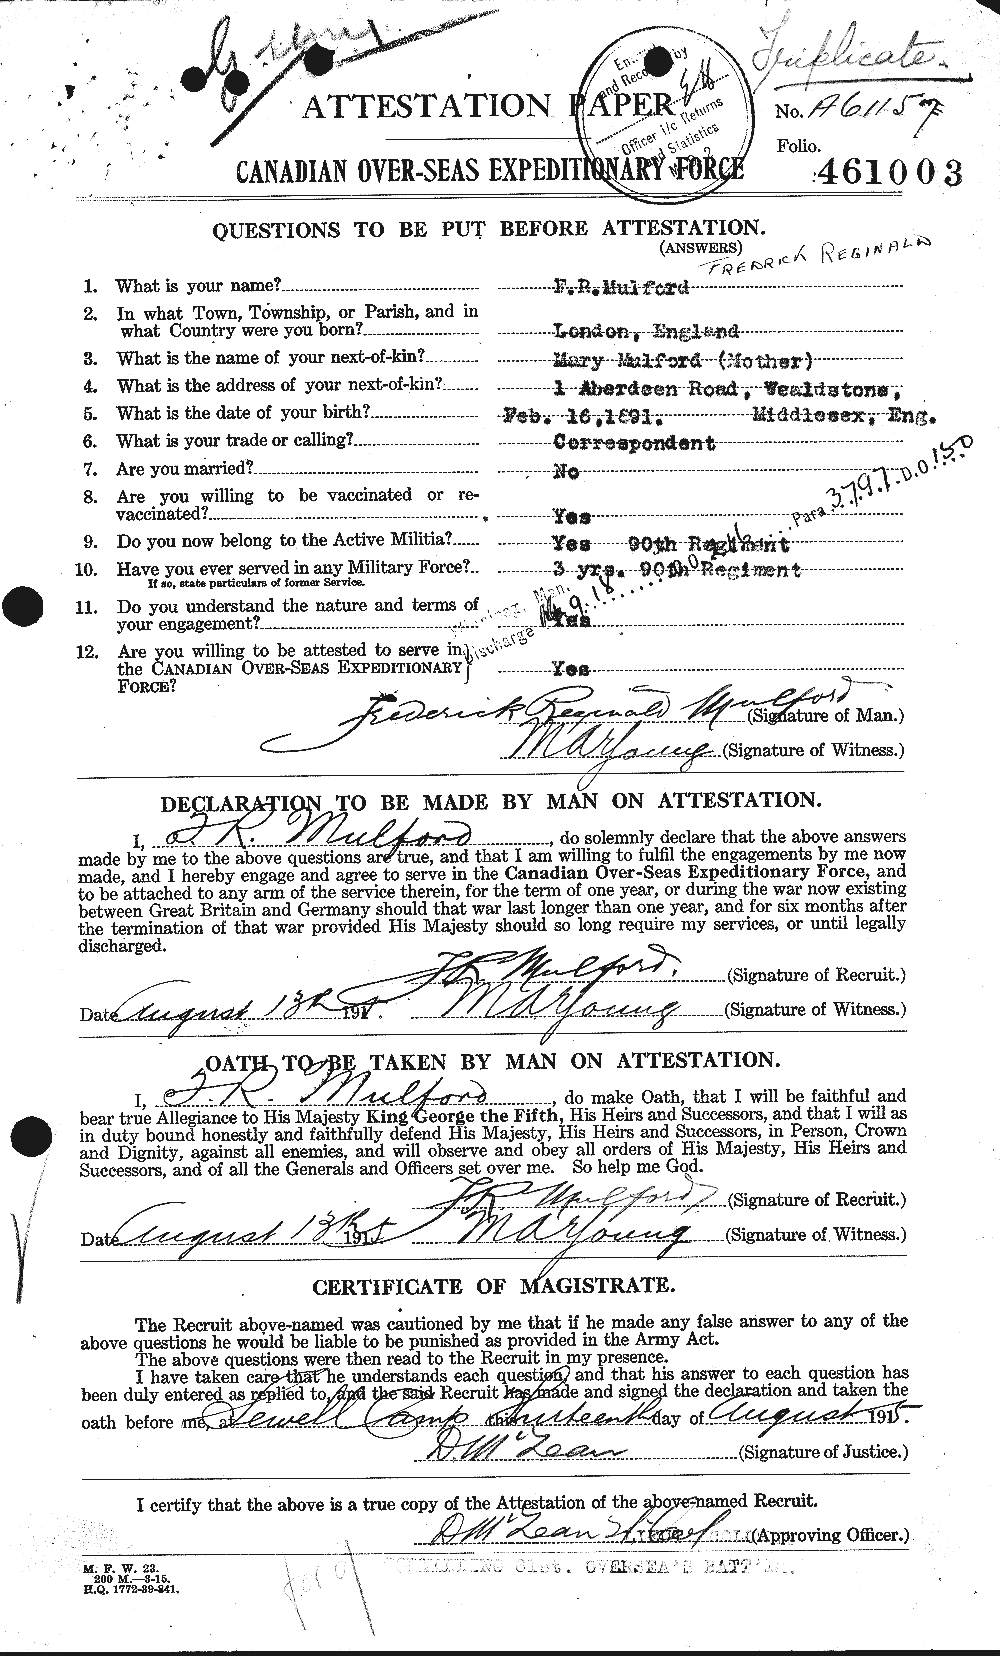 Personnel Records of the First World War - CEF 511500a